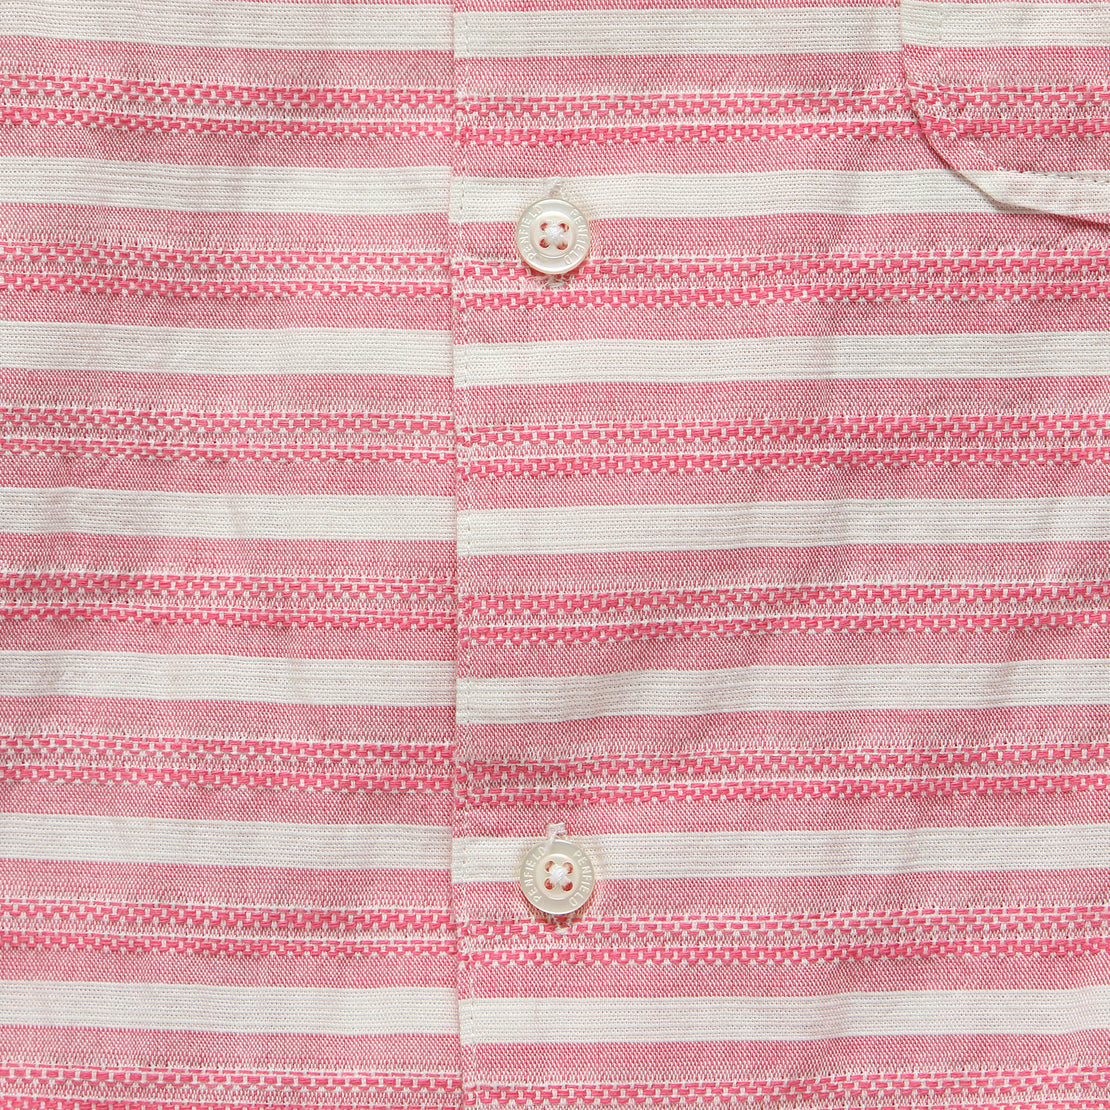 Hook Shirt - Pink - Penfield - STAG Provisions - Tops - S/S Woven - Stripe